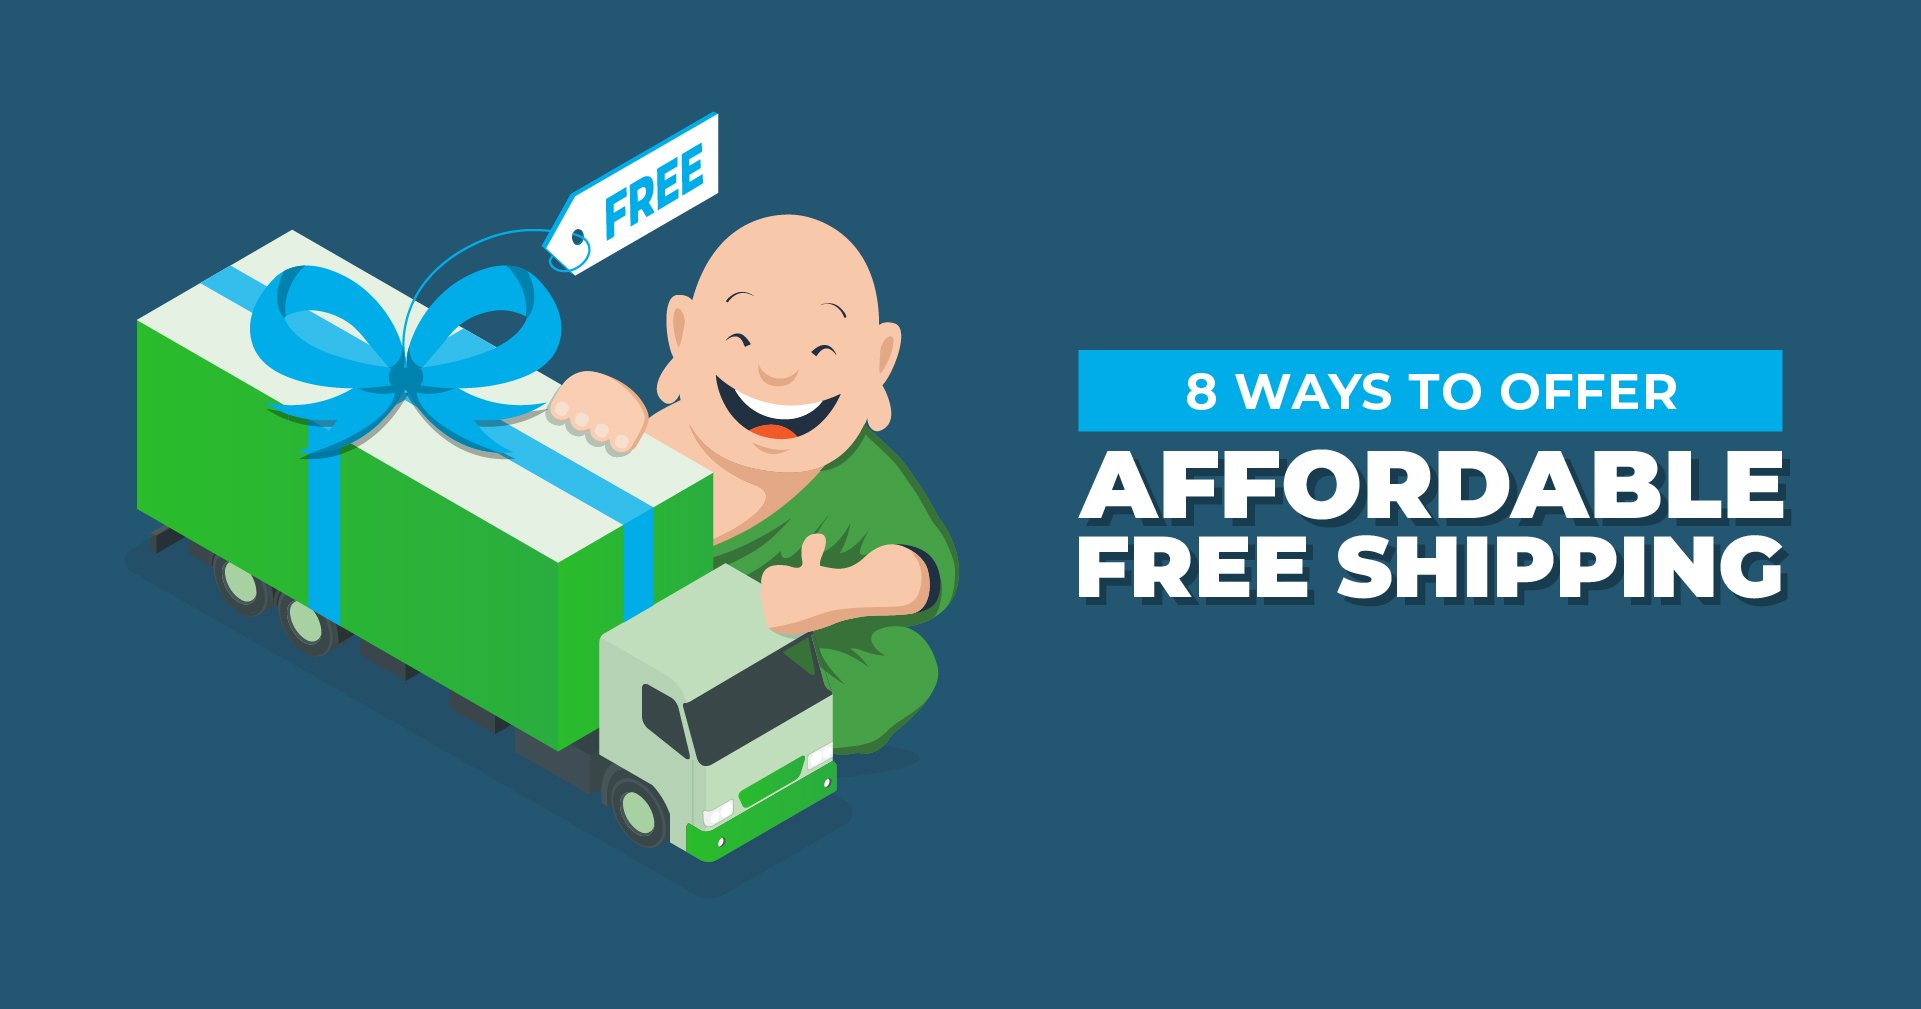 8 Ways to Offer Affordable Free Shipping